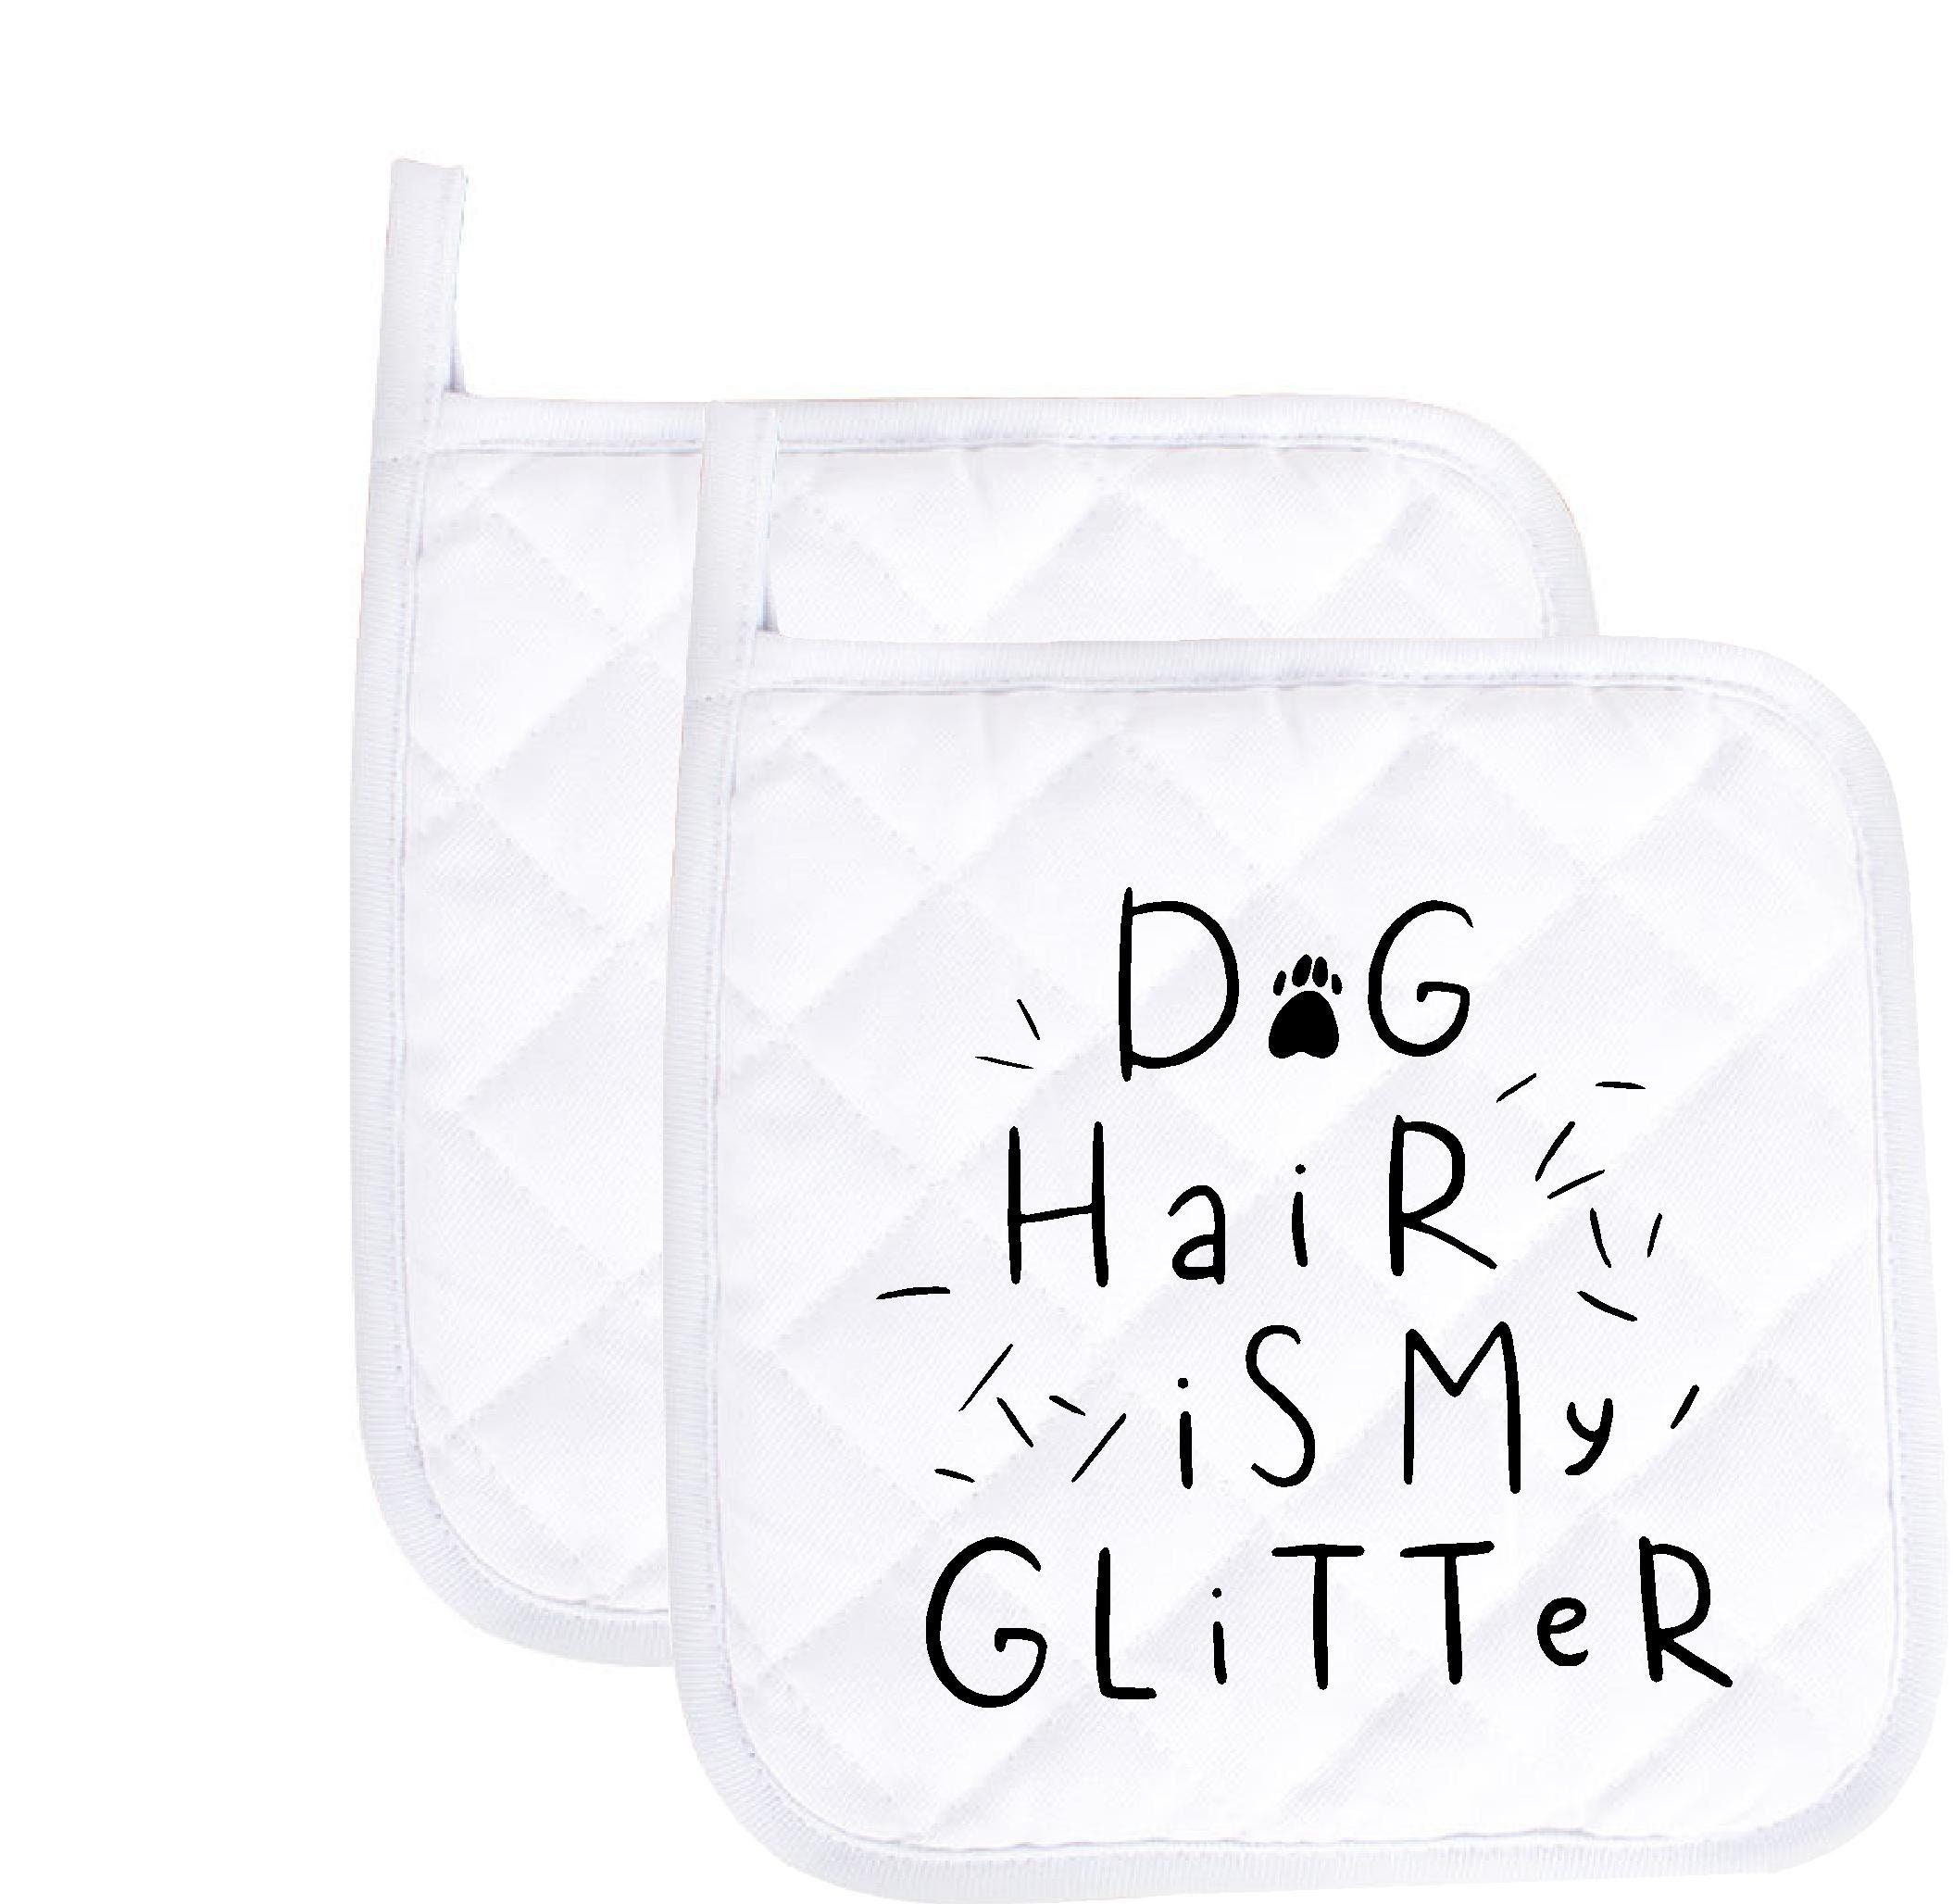 Dog hair is my glitter funny Potholder oven mitts cute pair kitchen Gloves cooking baking grilling non slip cotton